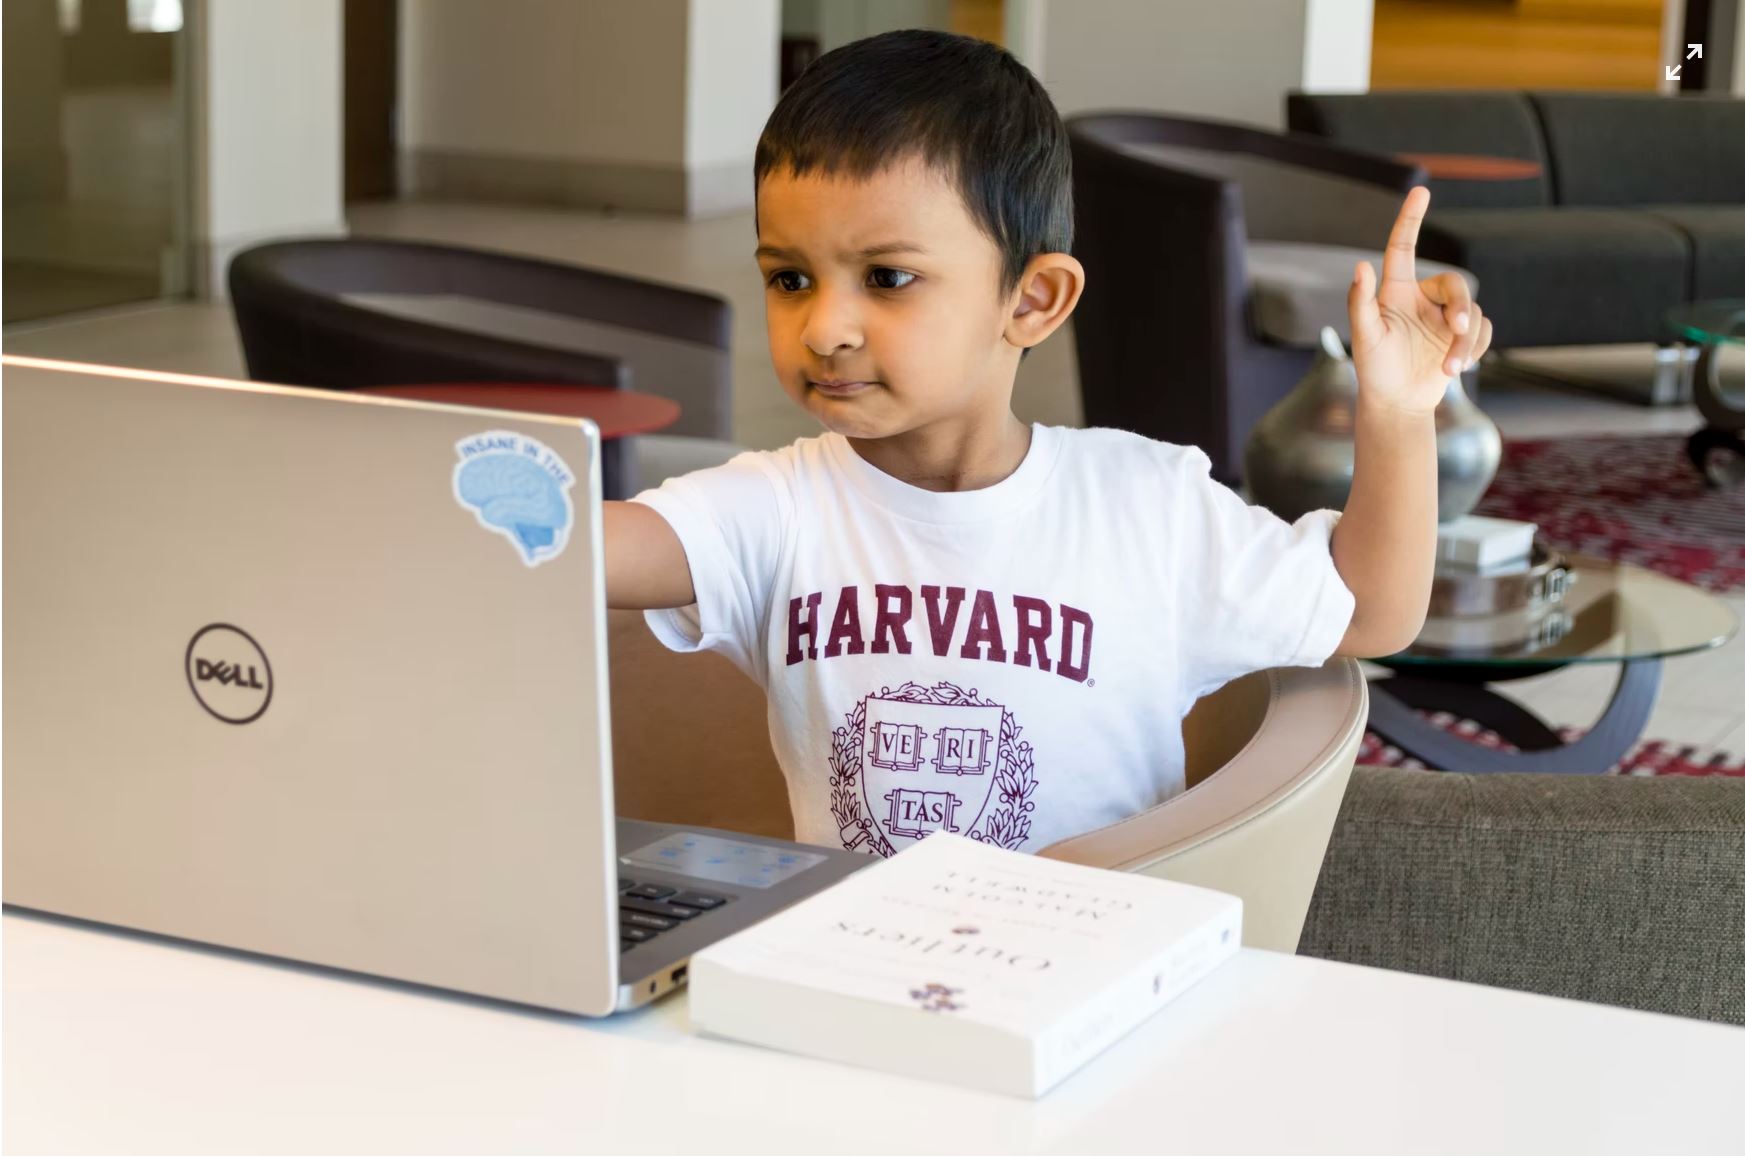 Child using Dell laptop